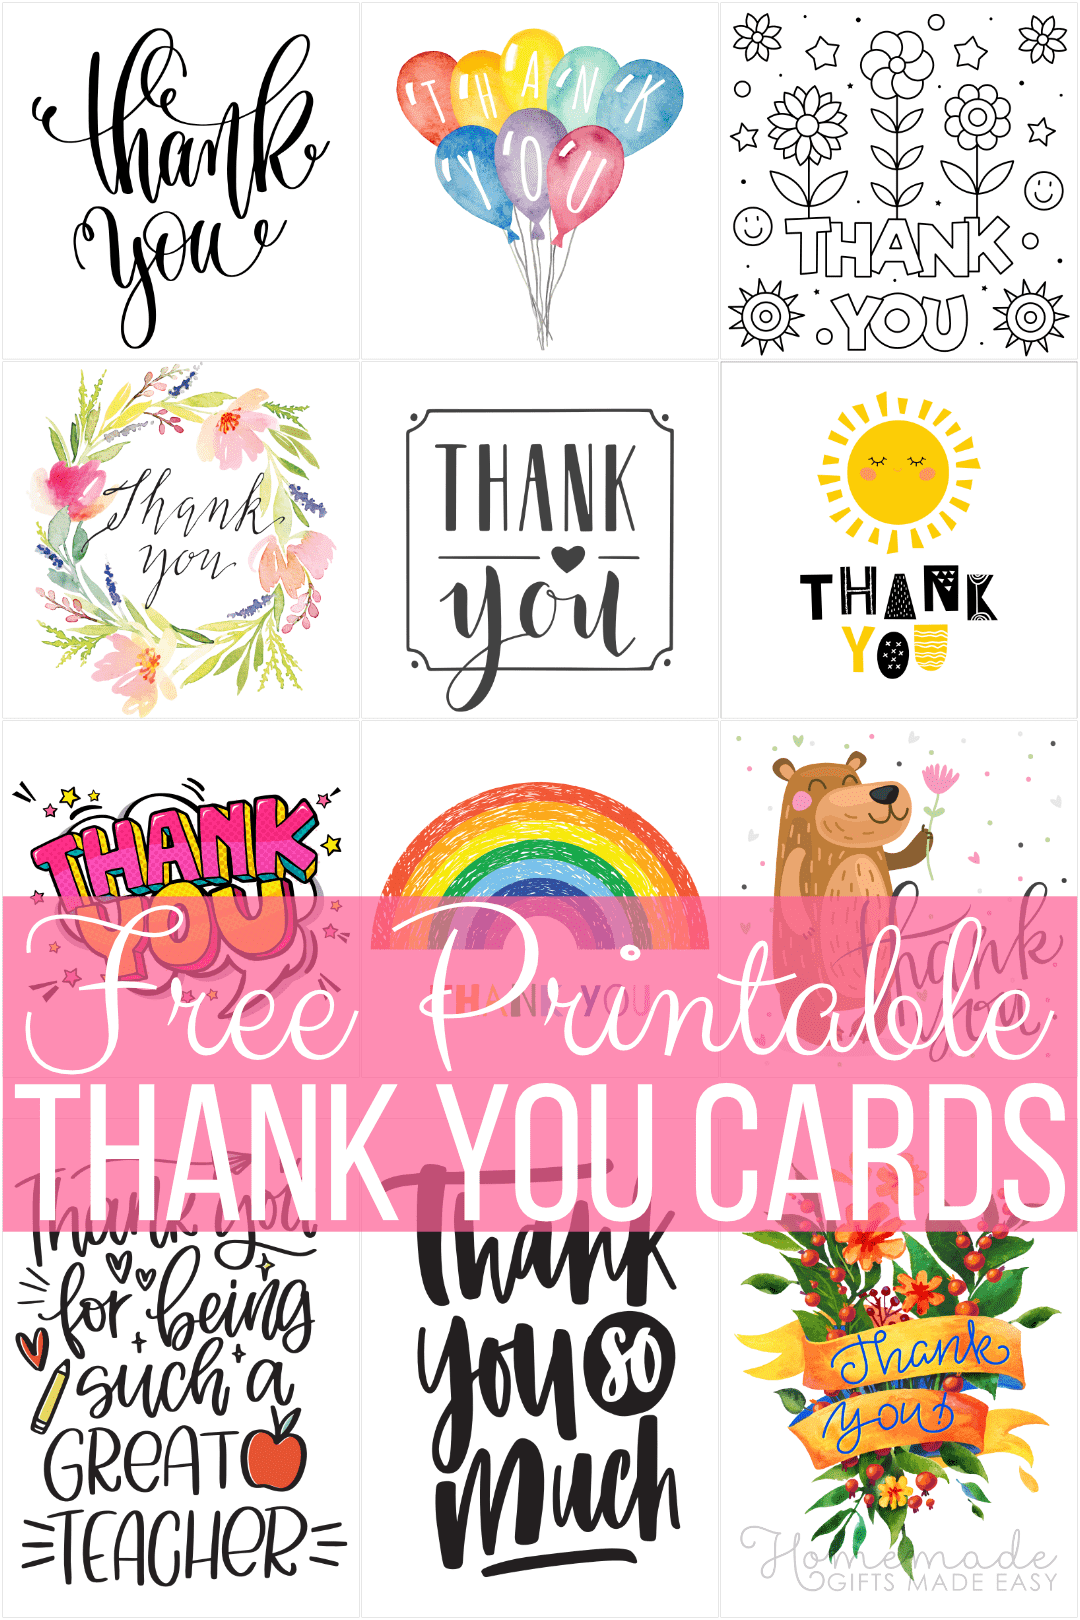 21 Free Printable Thank You Cards - Stylish High Quality Designs Within Card Folding Templates Free